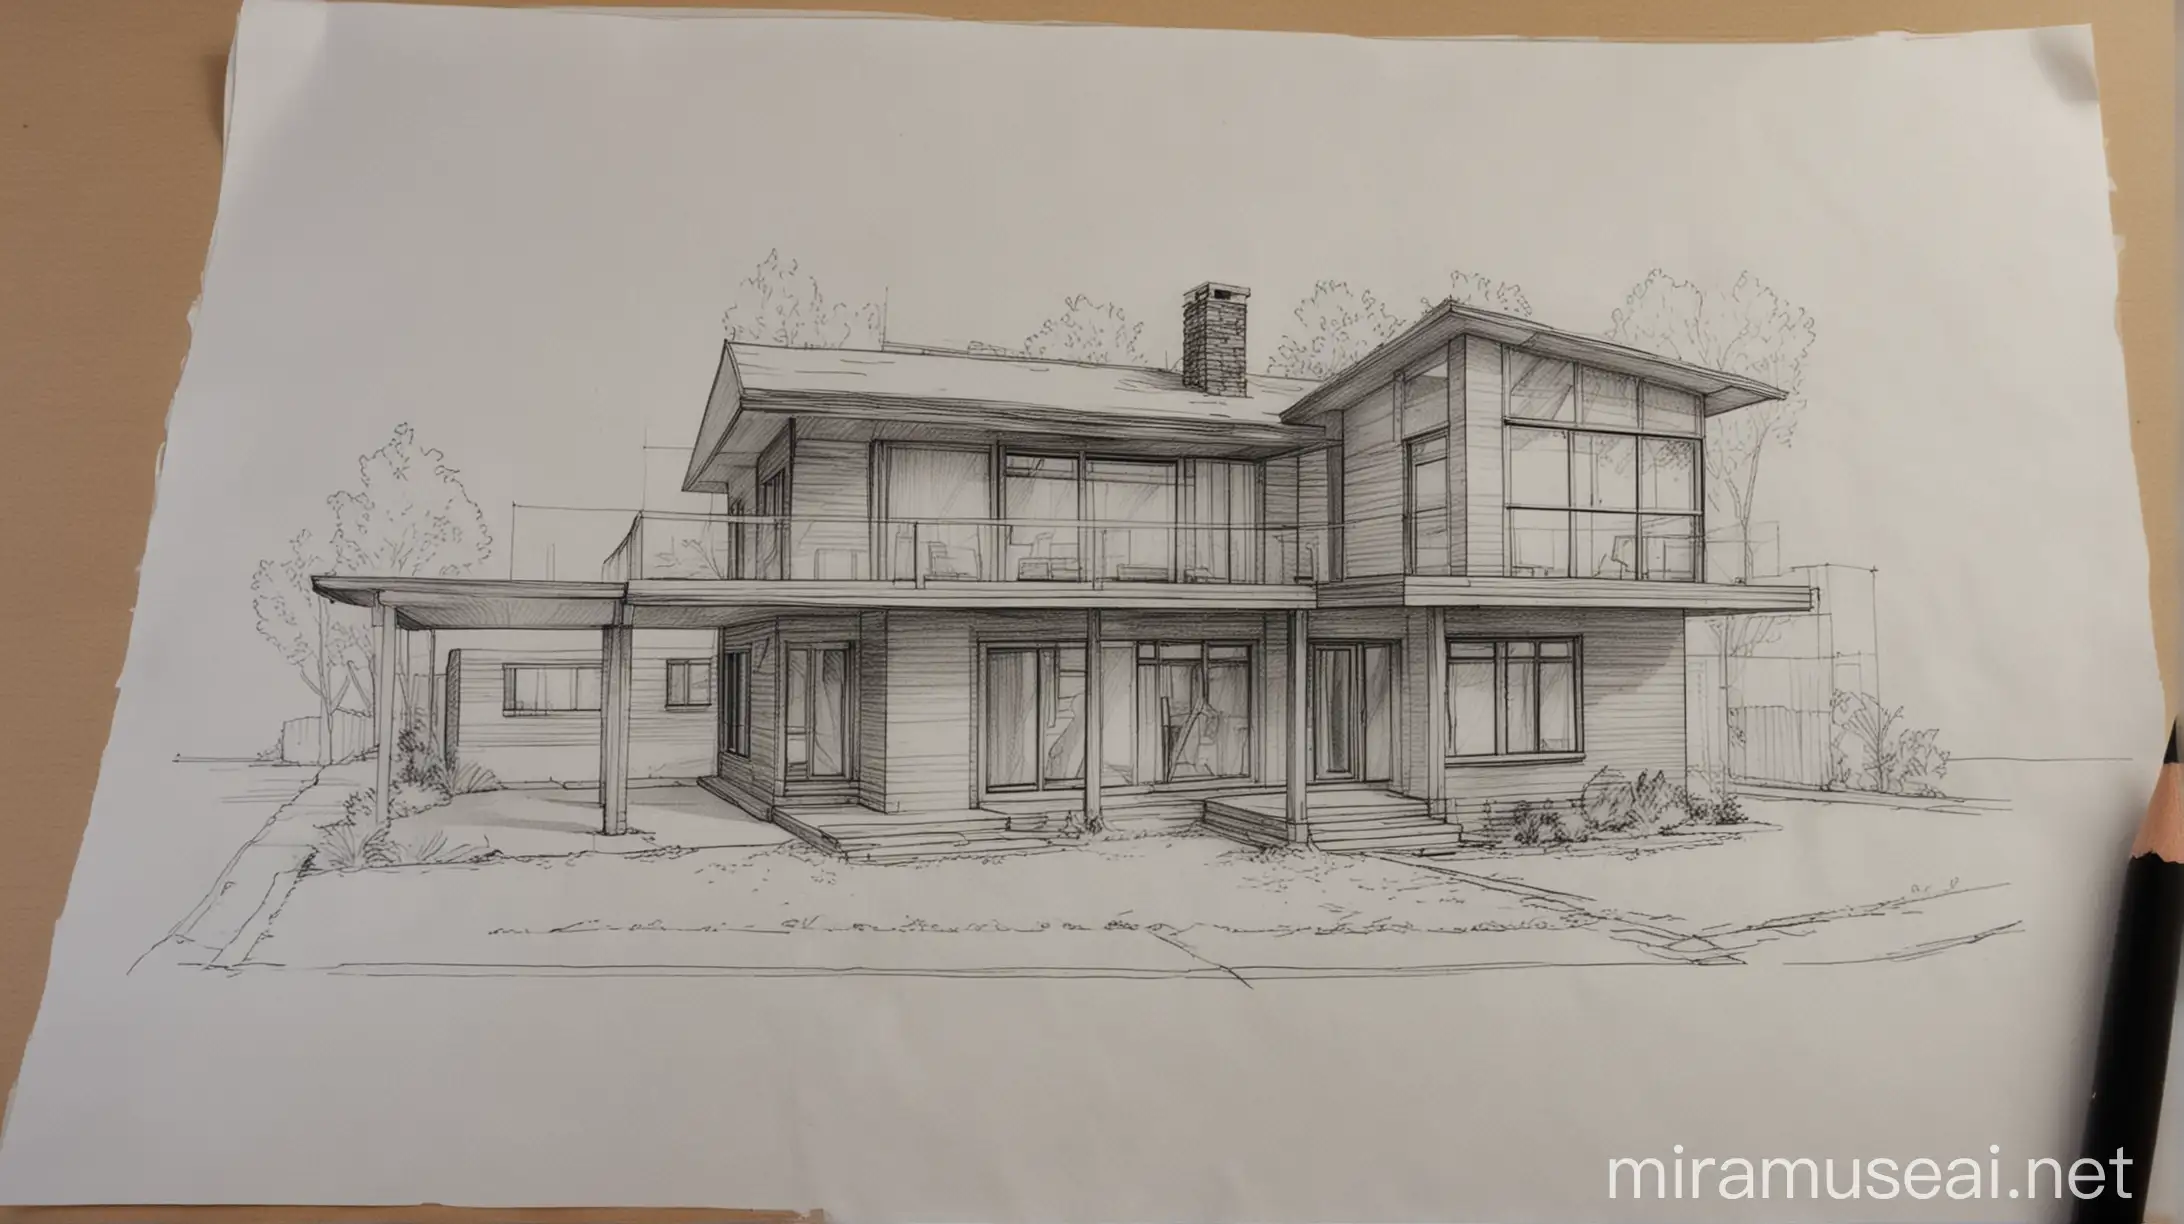 Draw house plans, with architecture, in pencil, make a project of a two-story house with a glass layout, and also make a garage underneath. Make a project on paper. Make it look realistic